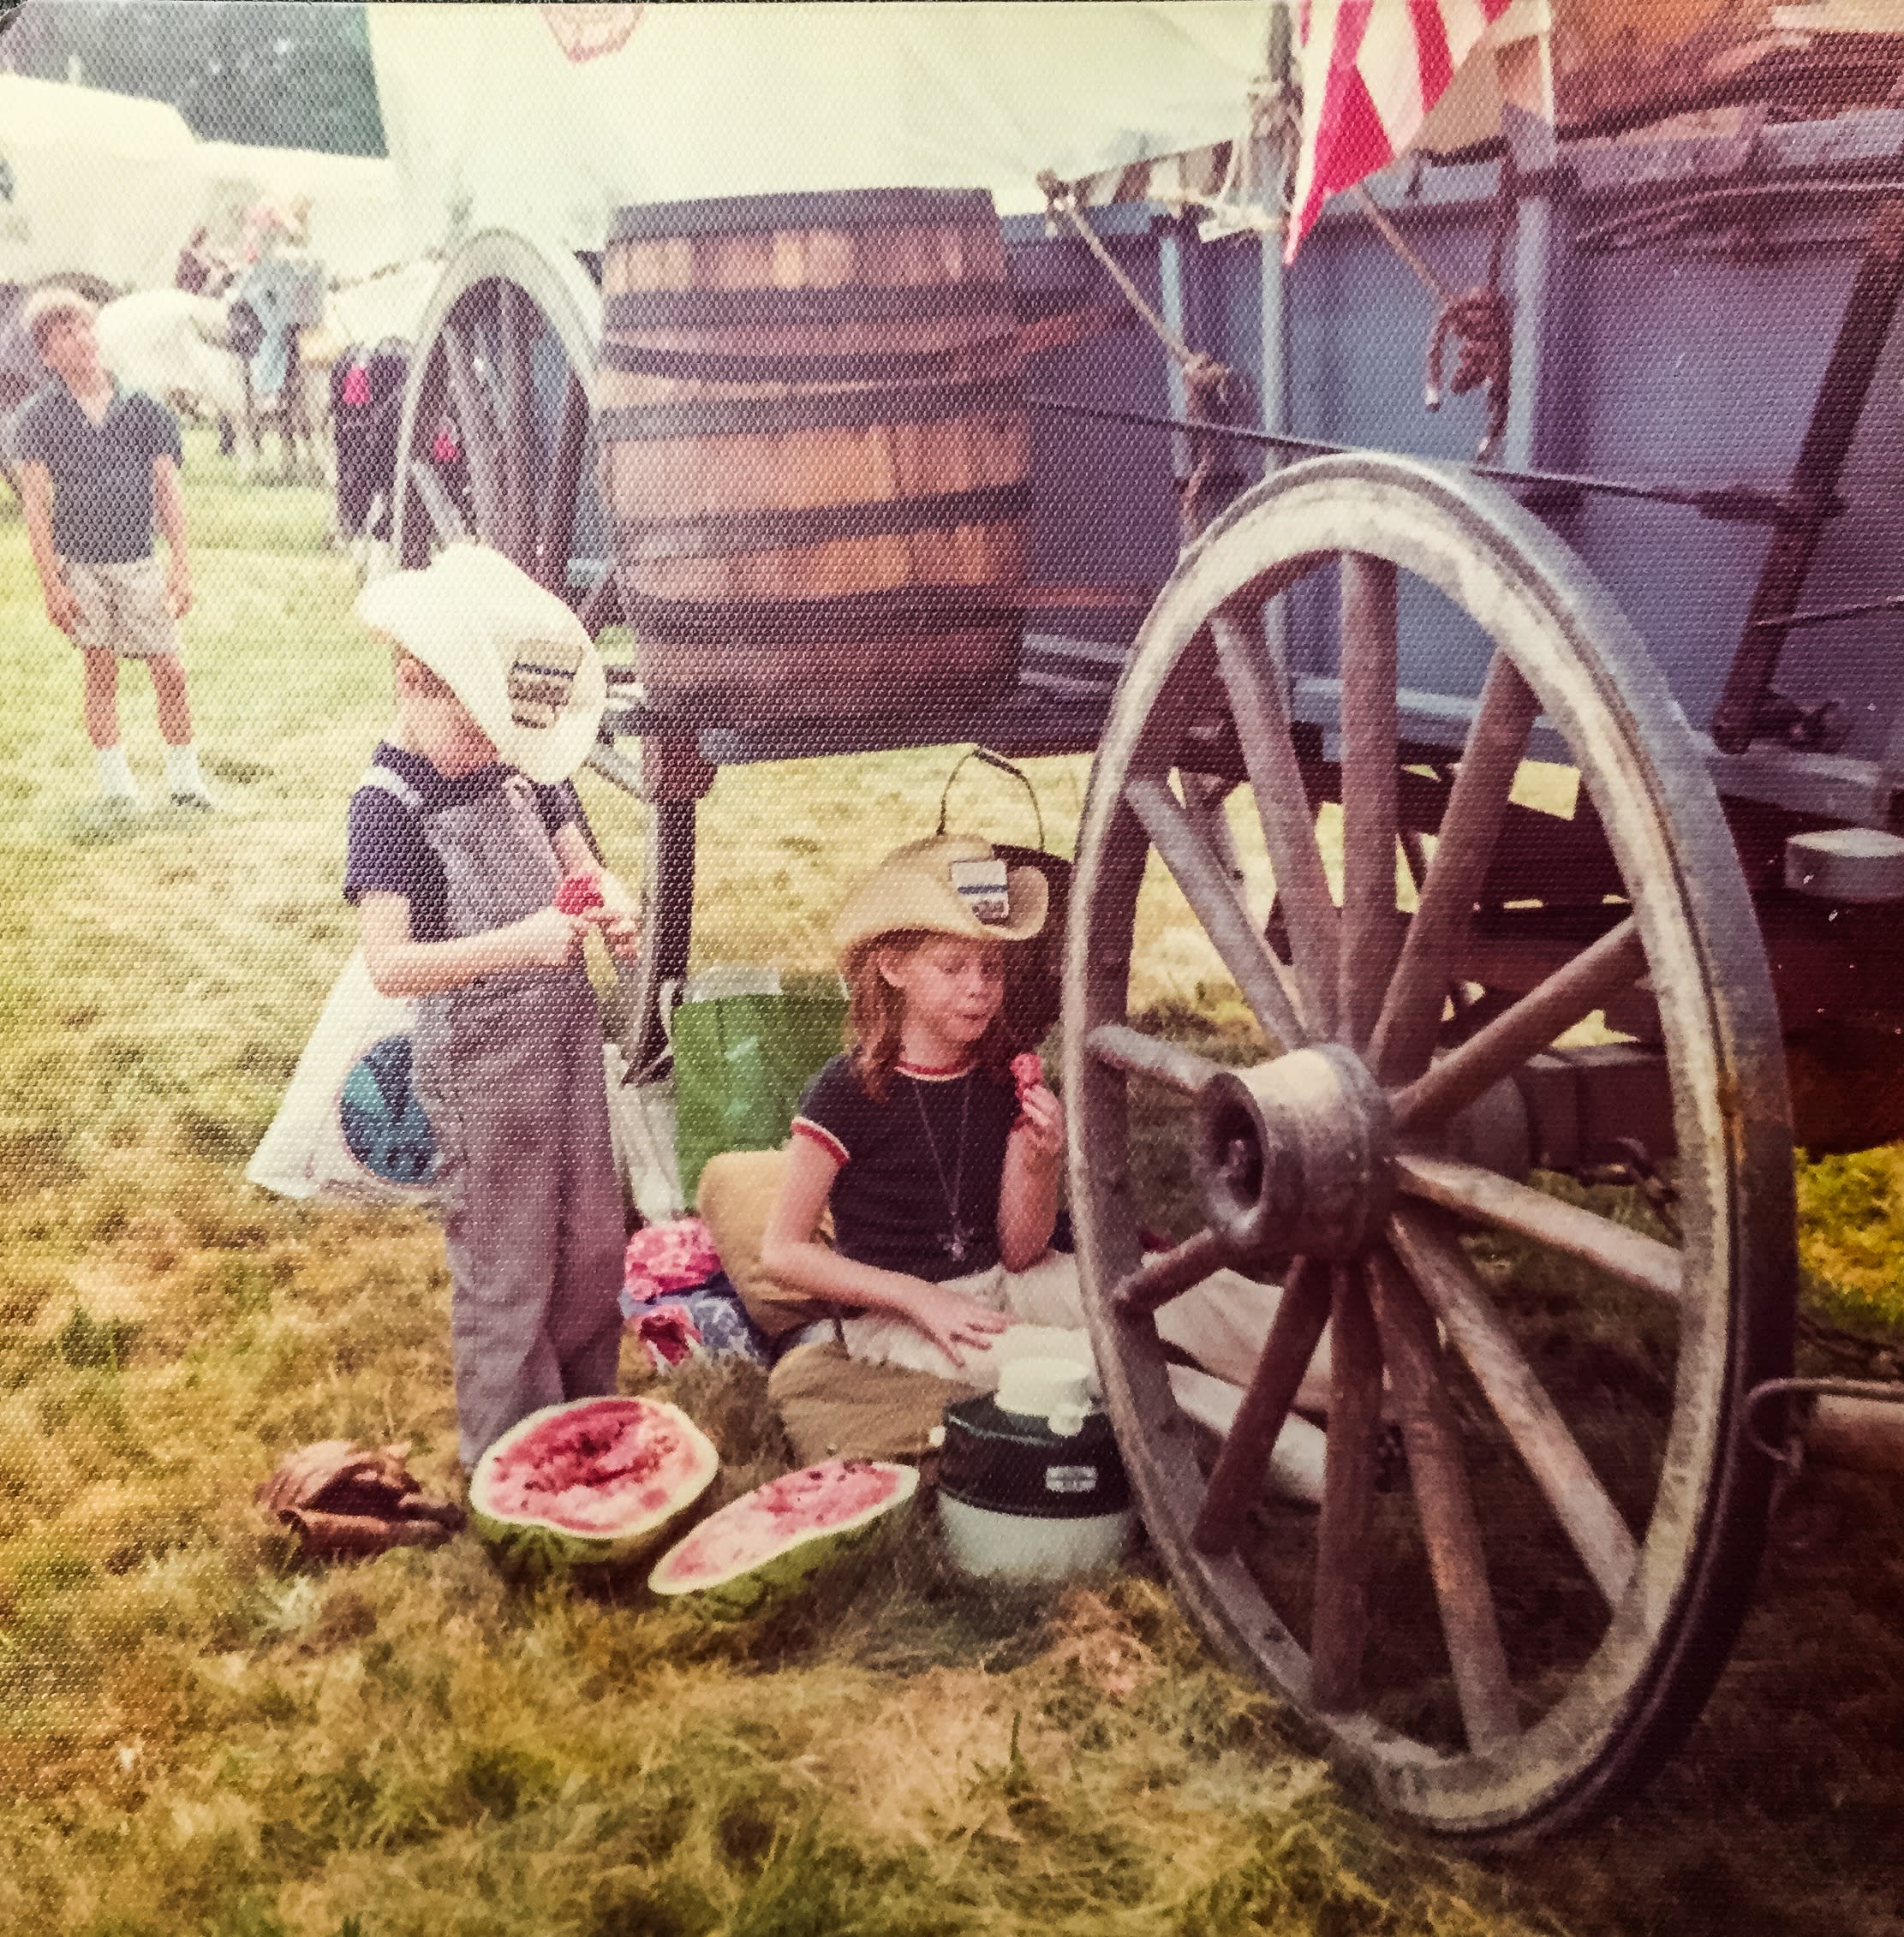 The Cutest Bicentennial Pioneers, Holly and her Brother C.R. | July 3, 1976